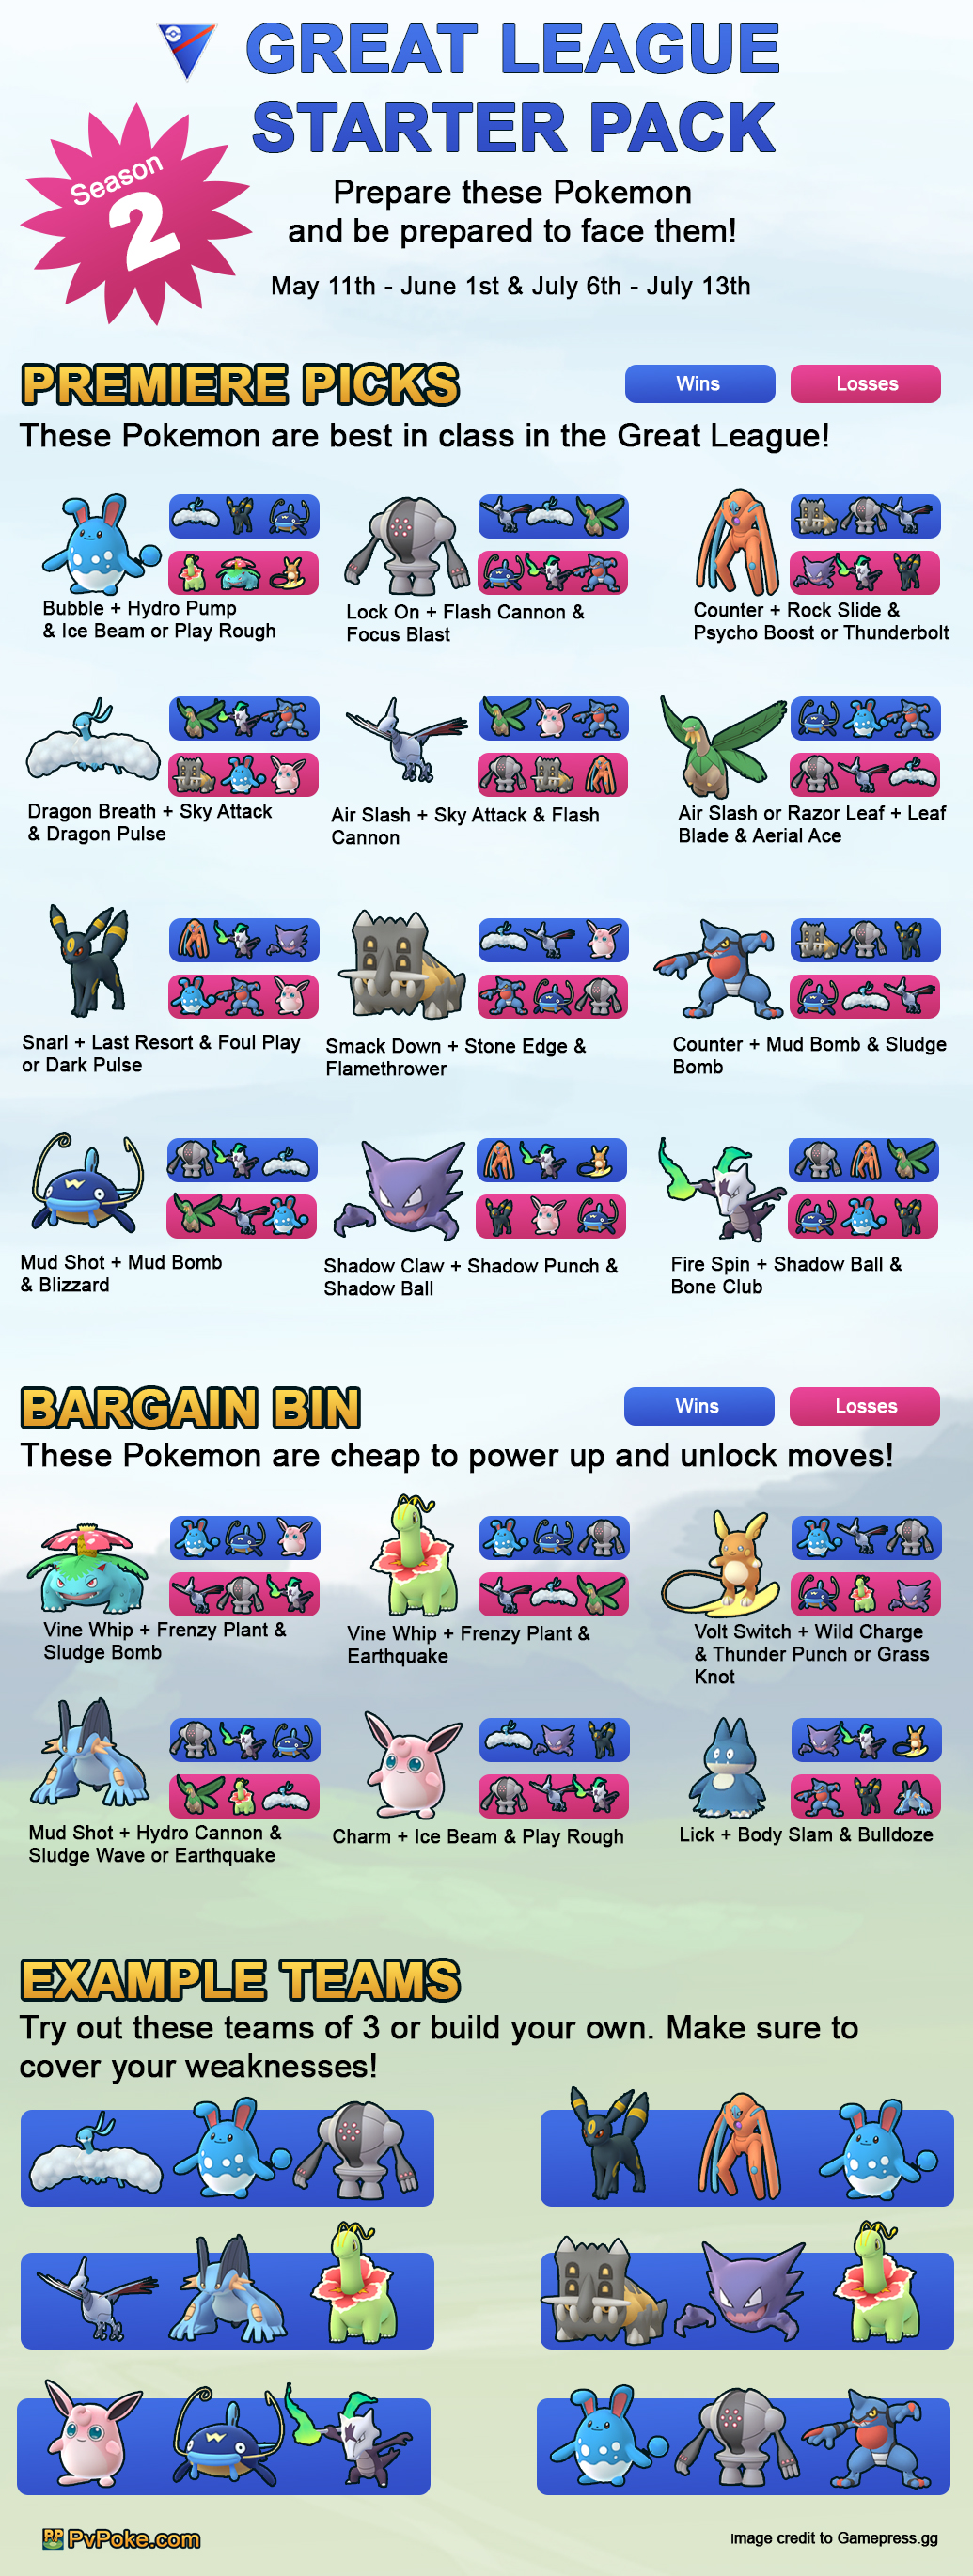 PvPoke.com on X: Here are the past week's top performing Voyager Cup teams  if you need inspiration! There's a winning framework with Hypno, Azumarill,  Altaria, and Meganium, but don't be afraid to